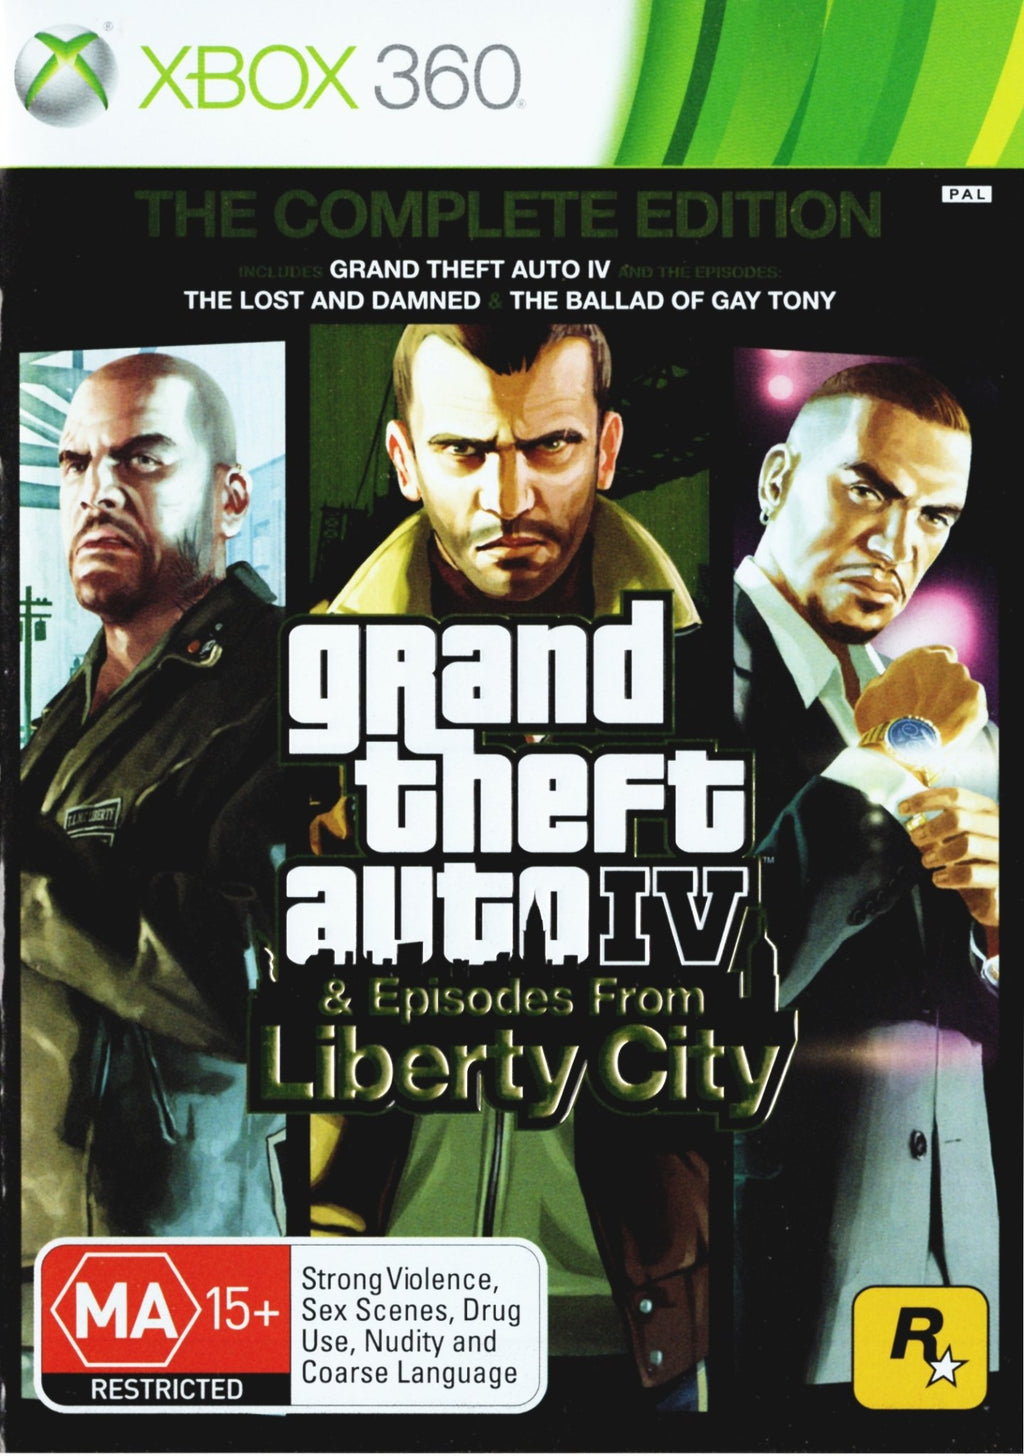 GTA 4: Episodes From Liberty City Cheats for Xbox 360